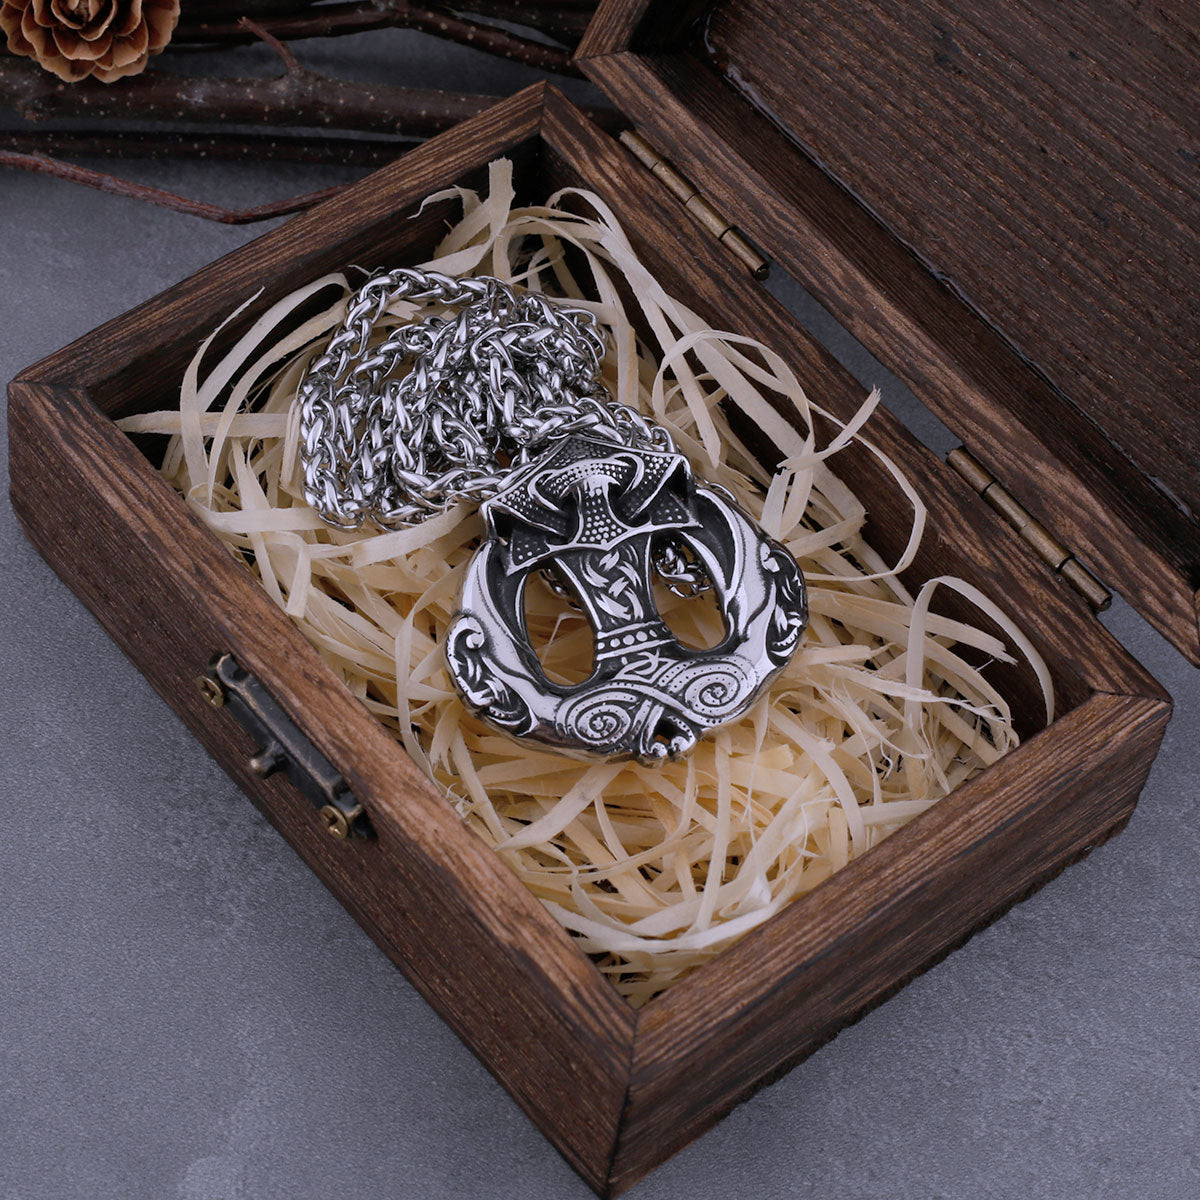 Thor's Hammer Mjolnir Necklace Featuring Nordic Anchor Design